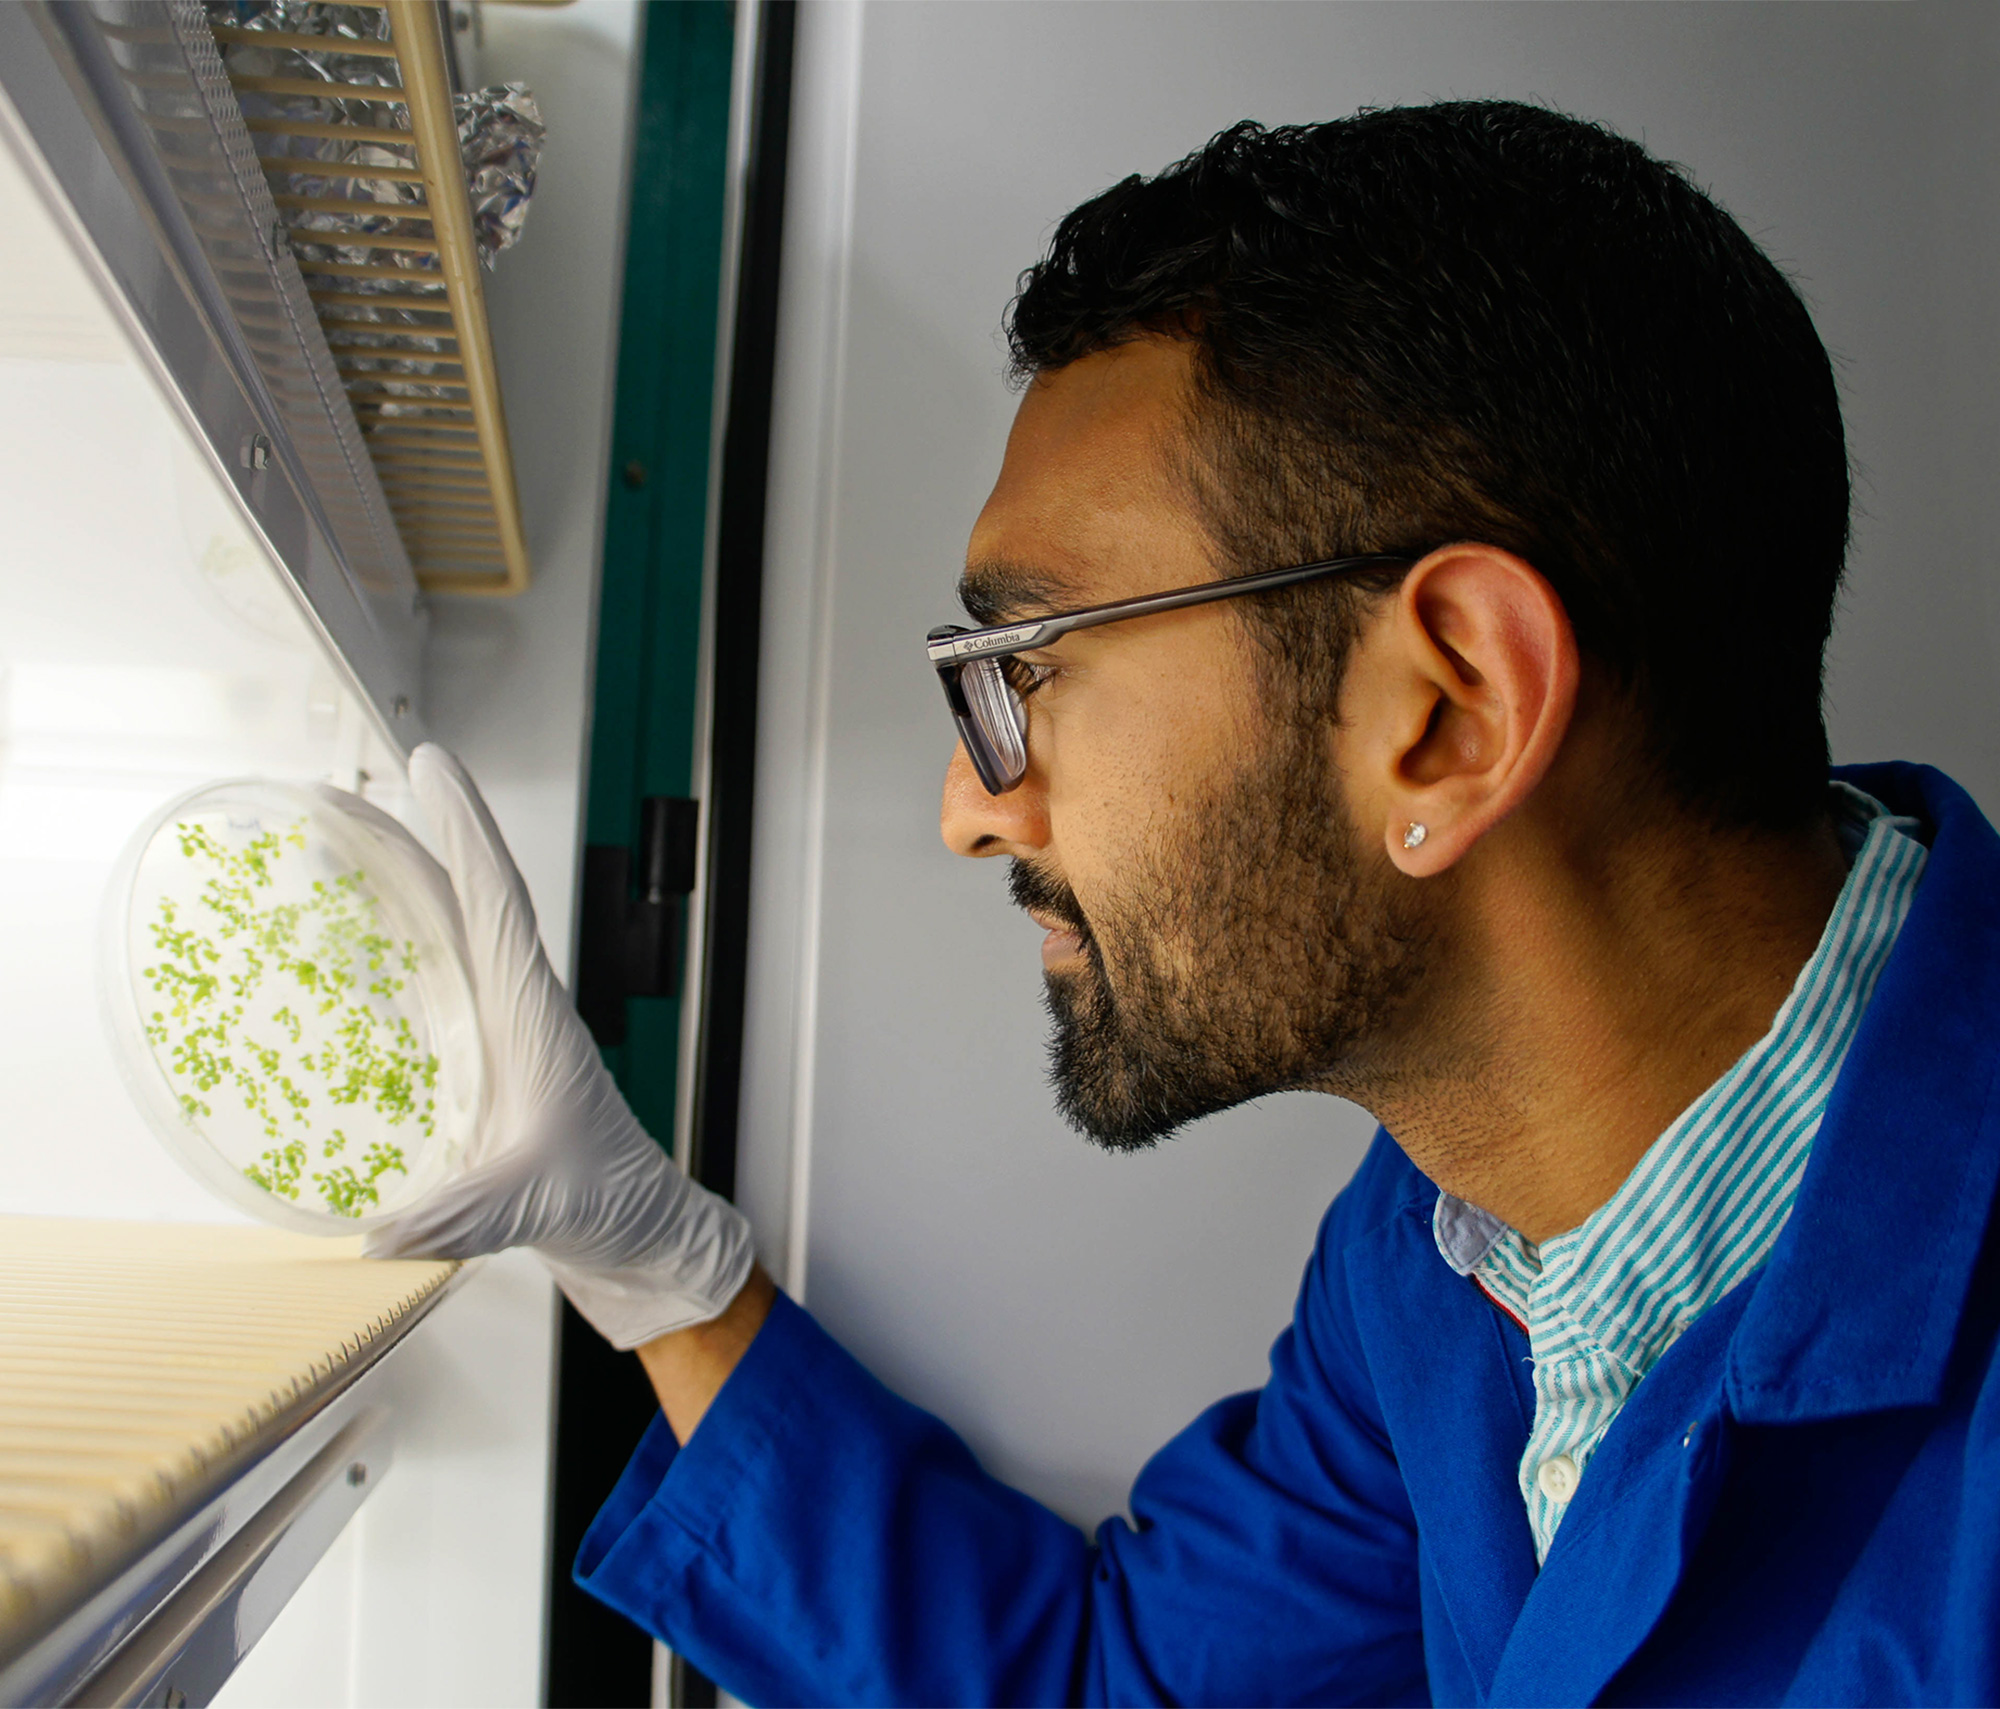 Dhruv Patel, a graduate student in the department of Plant and Microbial Biology, works to reduce food insecurity across the world through research that can help improve the efficiency of photosynthesis and water use in plants.